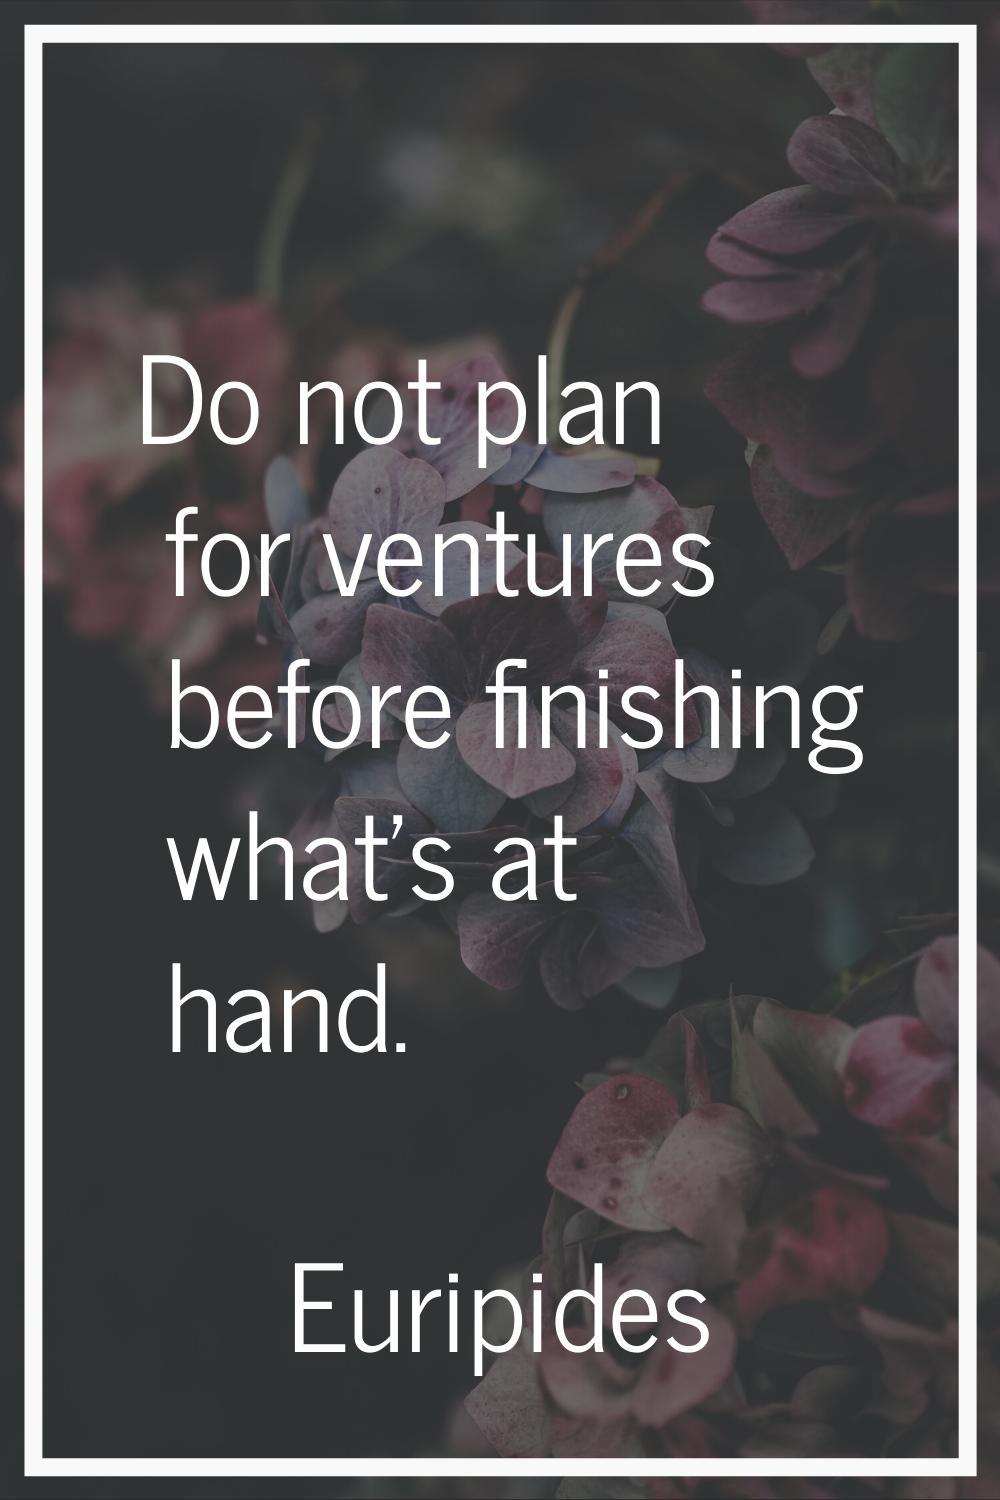 Do not plan for ventures before finishing what's at hand.